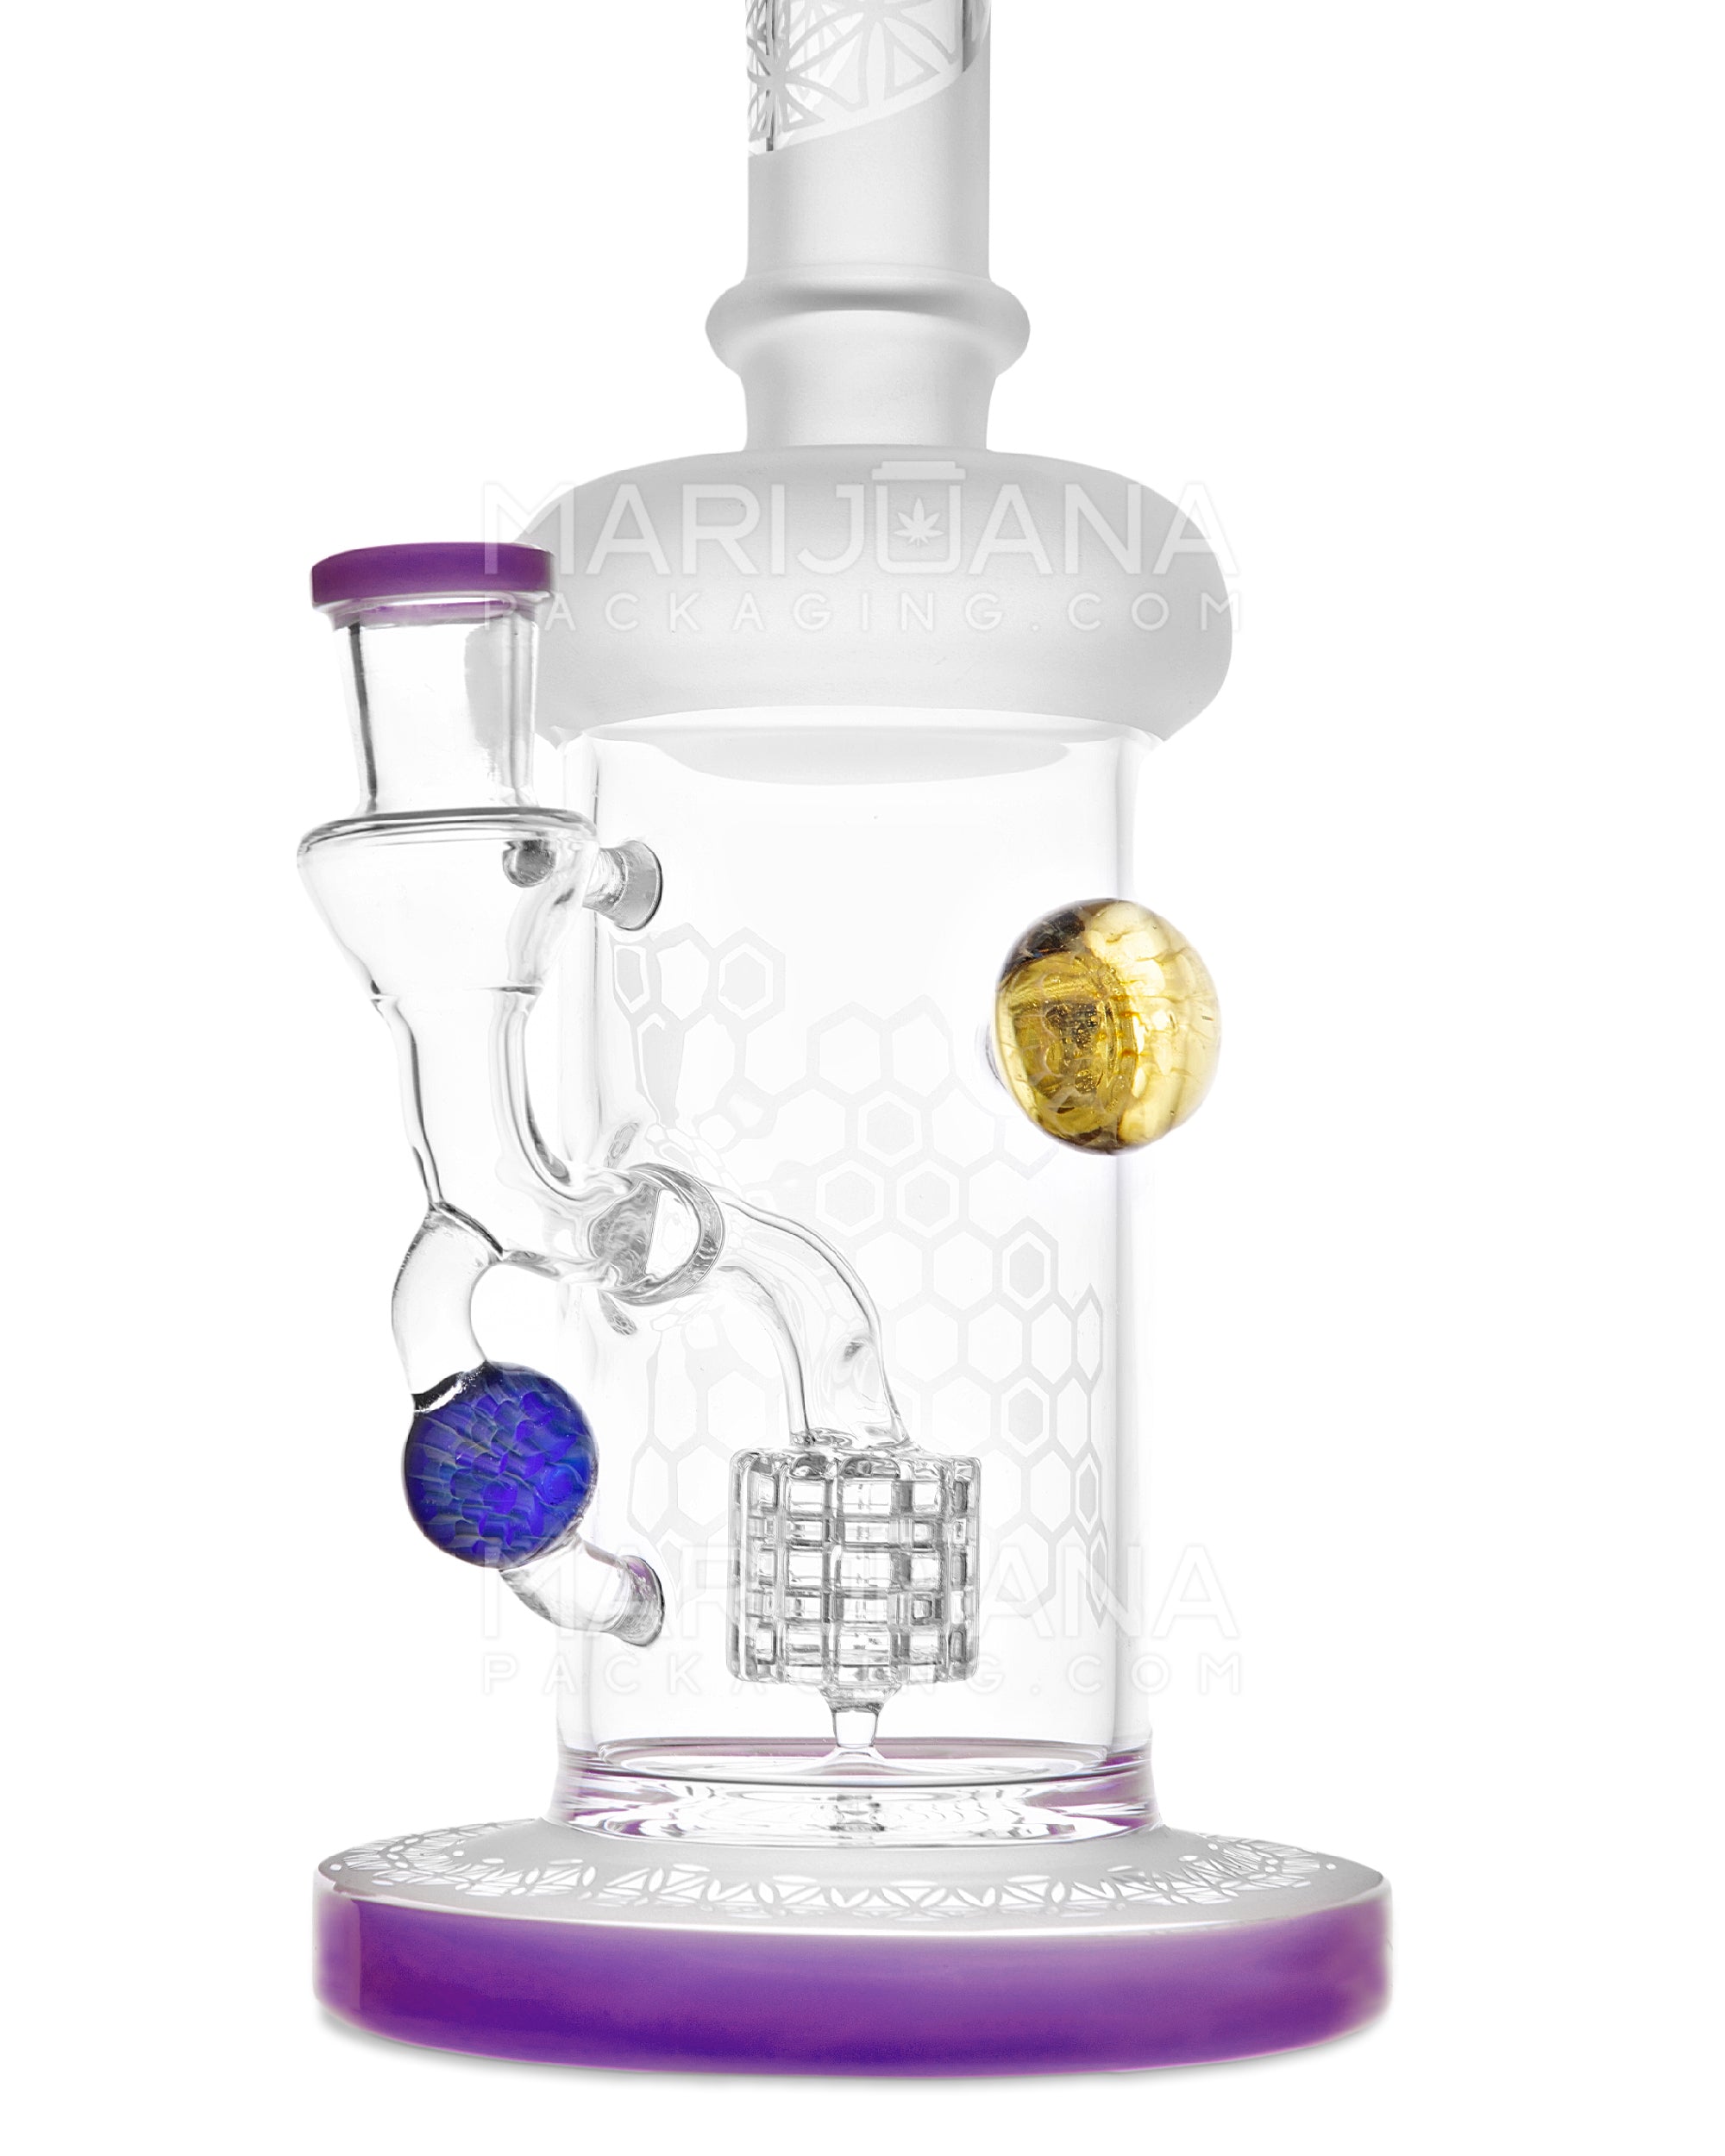 USA Glass | Straight Neck Matrix Perc Sandblasted Glass Water Pipe w/ Implosion Marbles | 11in Tall - 14mm Bowl - Purple - 3